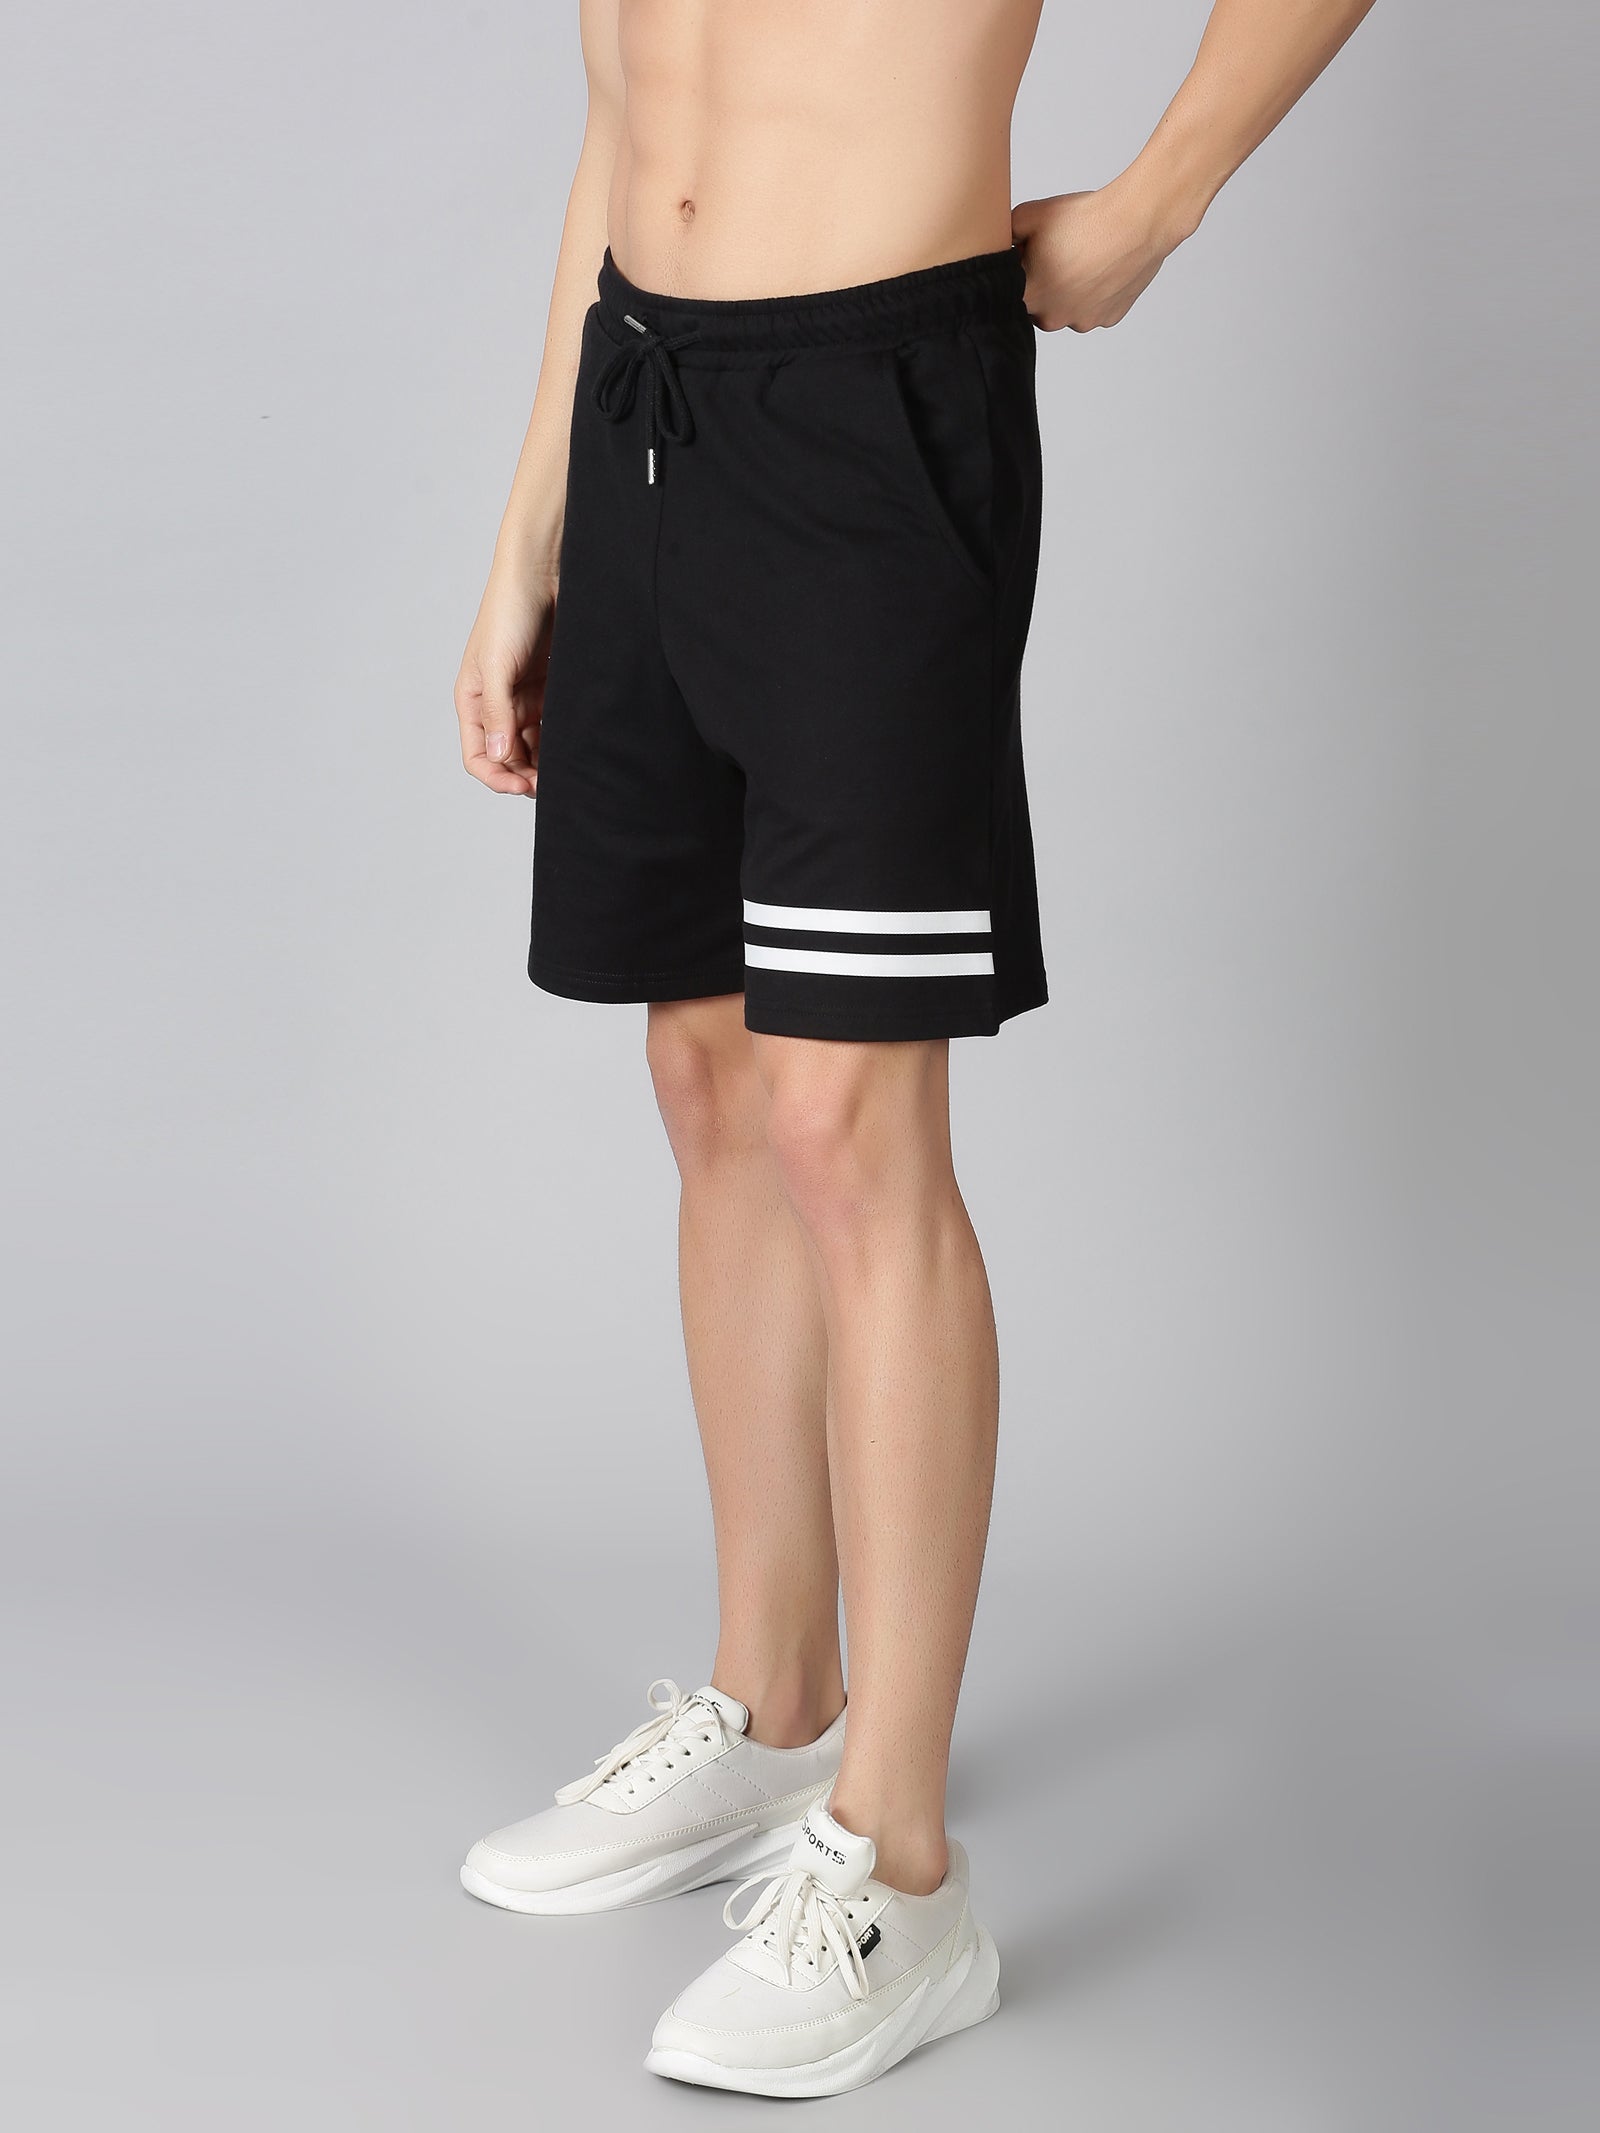 Dares Only Rudiments Black shorts